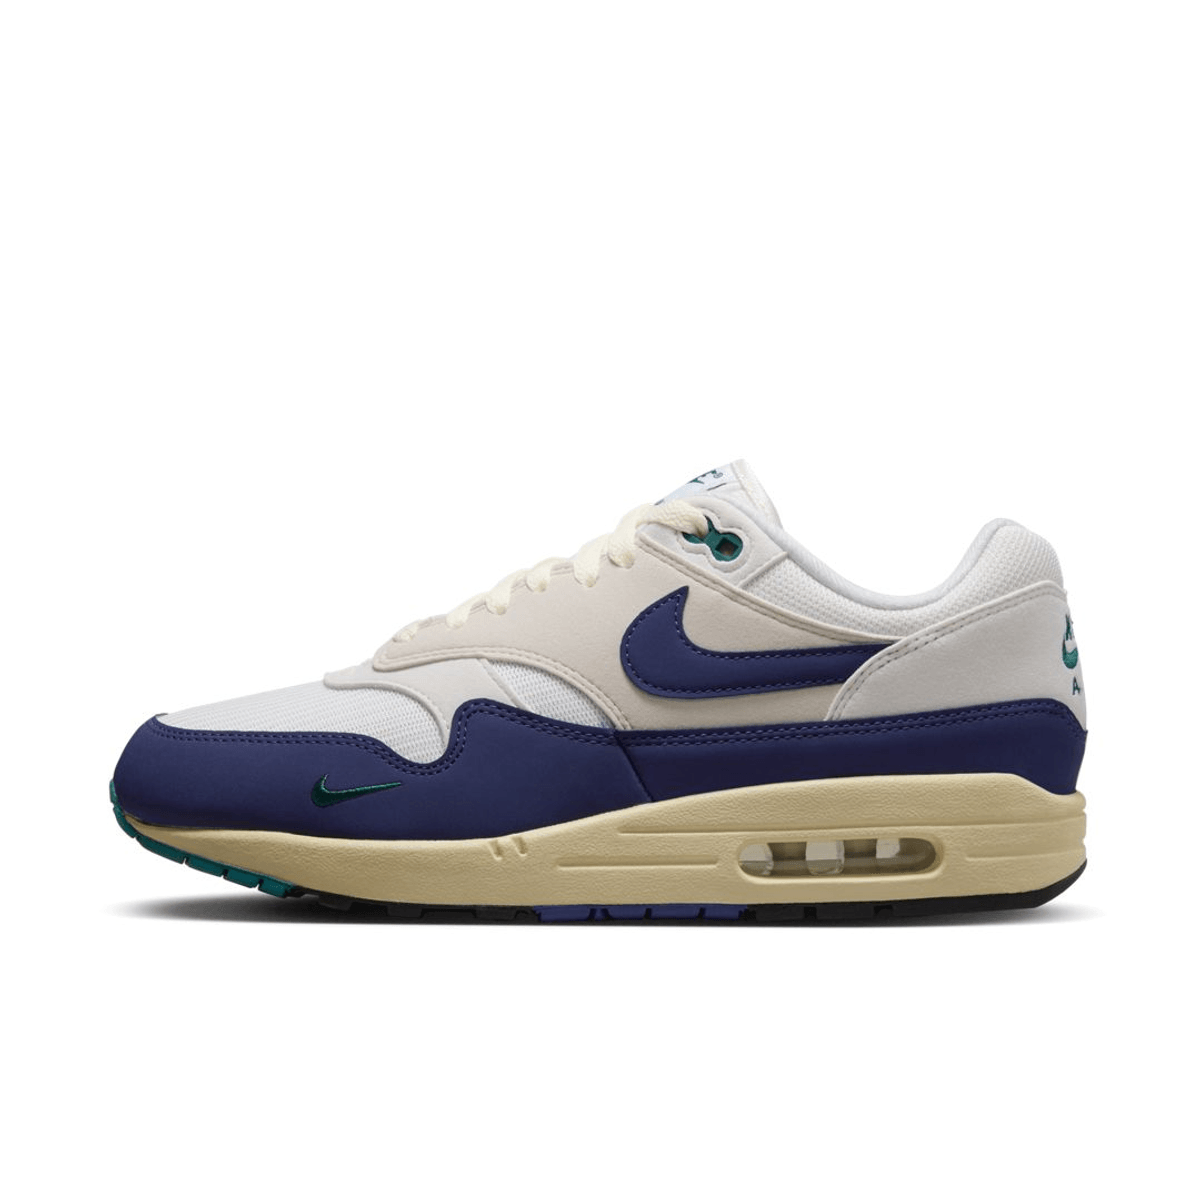 The Nike Air Max 1 Gets The "Athletic Dept." Treatment